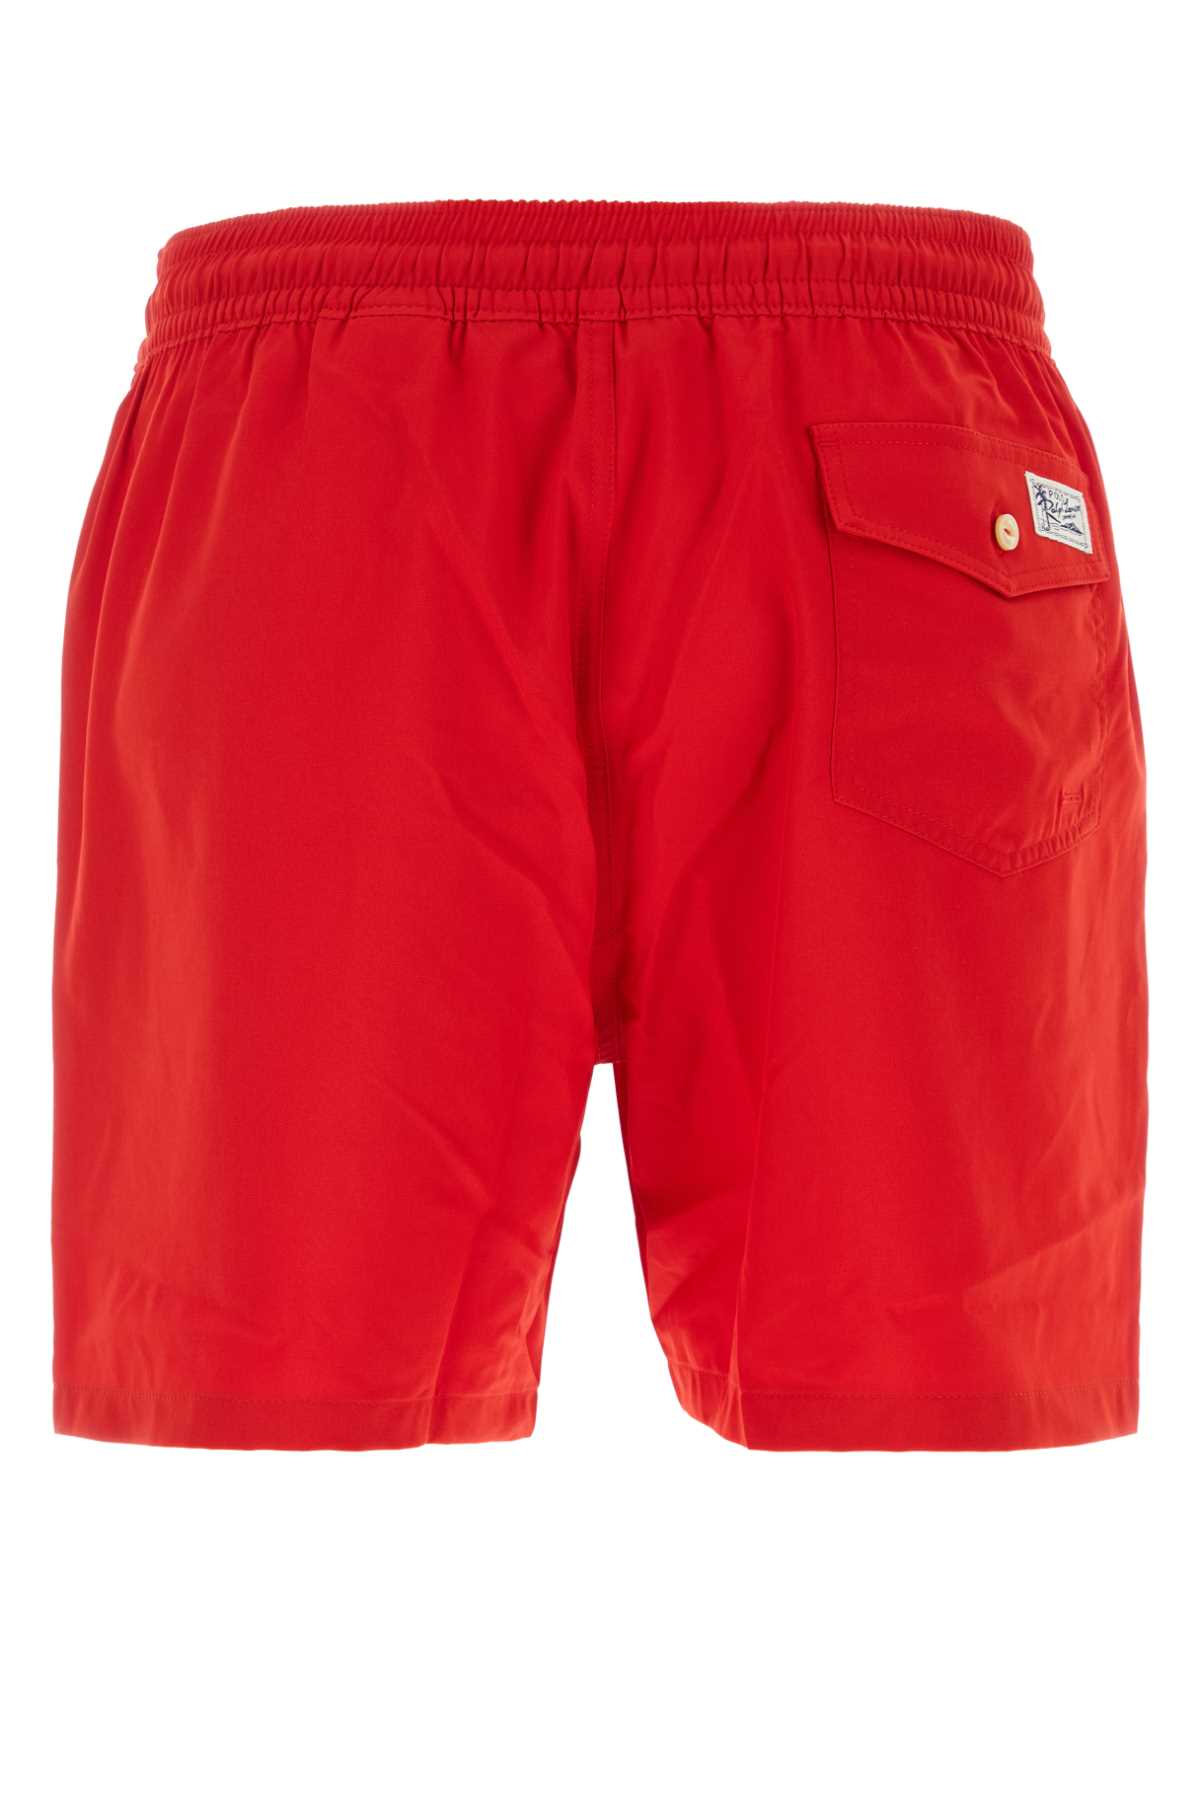 Shop Polo Ralph Lauren Red Stretch Polyester Swimming Shorts